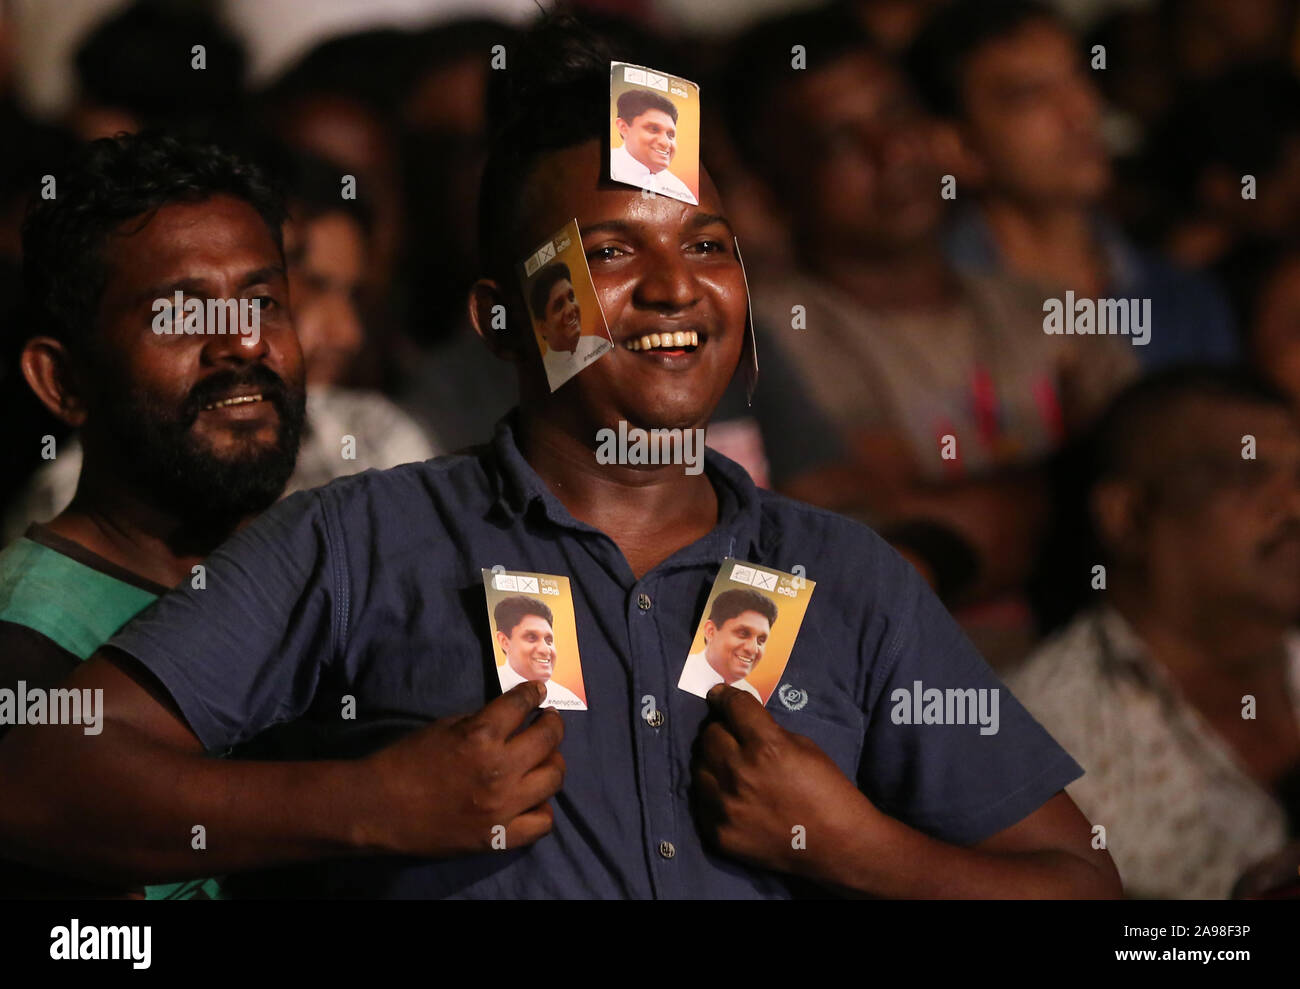 Colombo, western province, Sri Lanka. 13th Nov, 2019. Supporters of the ruling United National Party (UNP) and New Democratic Front (NDF) presidential candidate Sajith Premadasa attend a final campaign rally under rain in Colombo on November 13, 2019, ahead of the November 16 presidential election. Police stepped up security across Sri Lanka on November 13 over fears of violence on the final day of campaigning for the fiercely contested presidential election, officials said. Credit: Pradeep Dambarage/ZUMA Wire/Alamy Live News Stock Photo